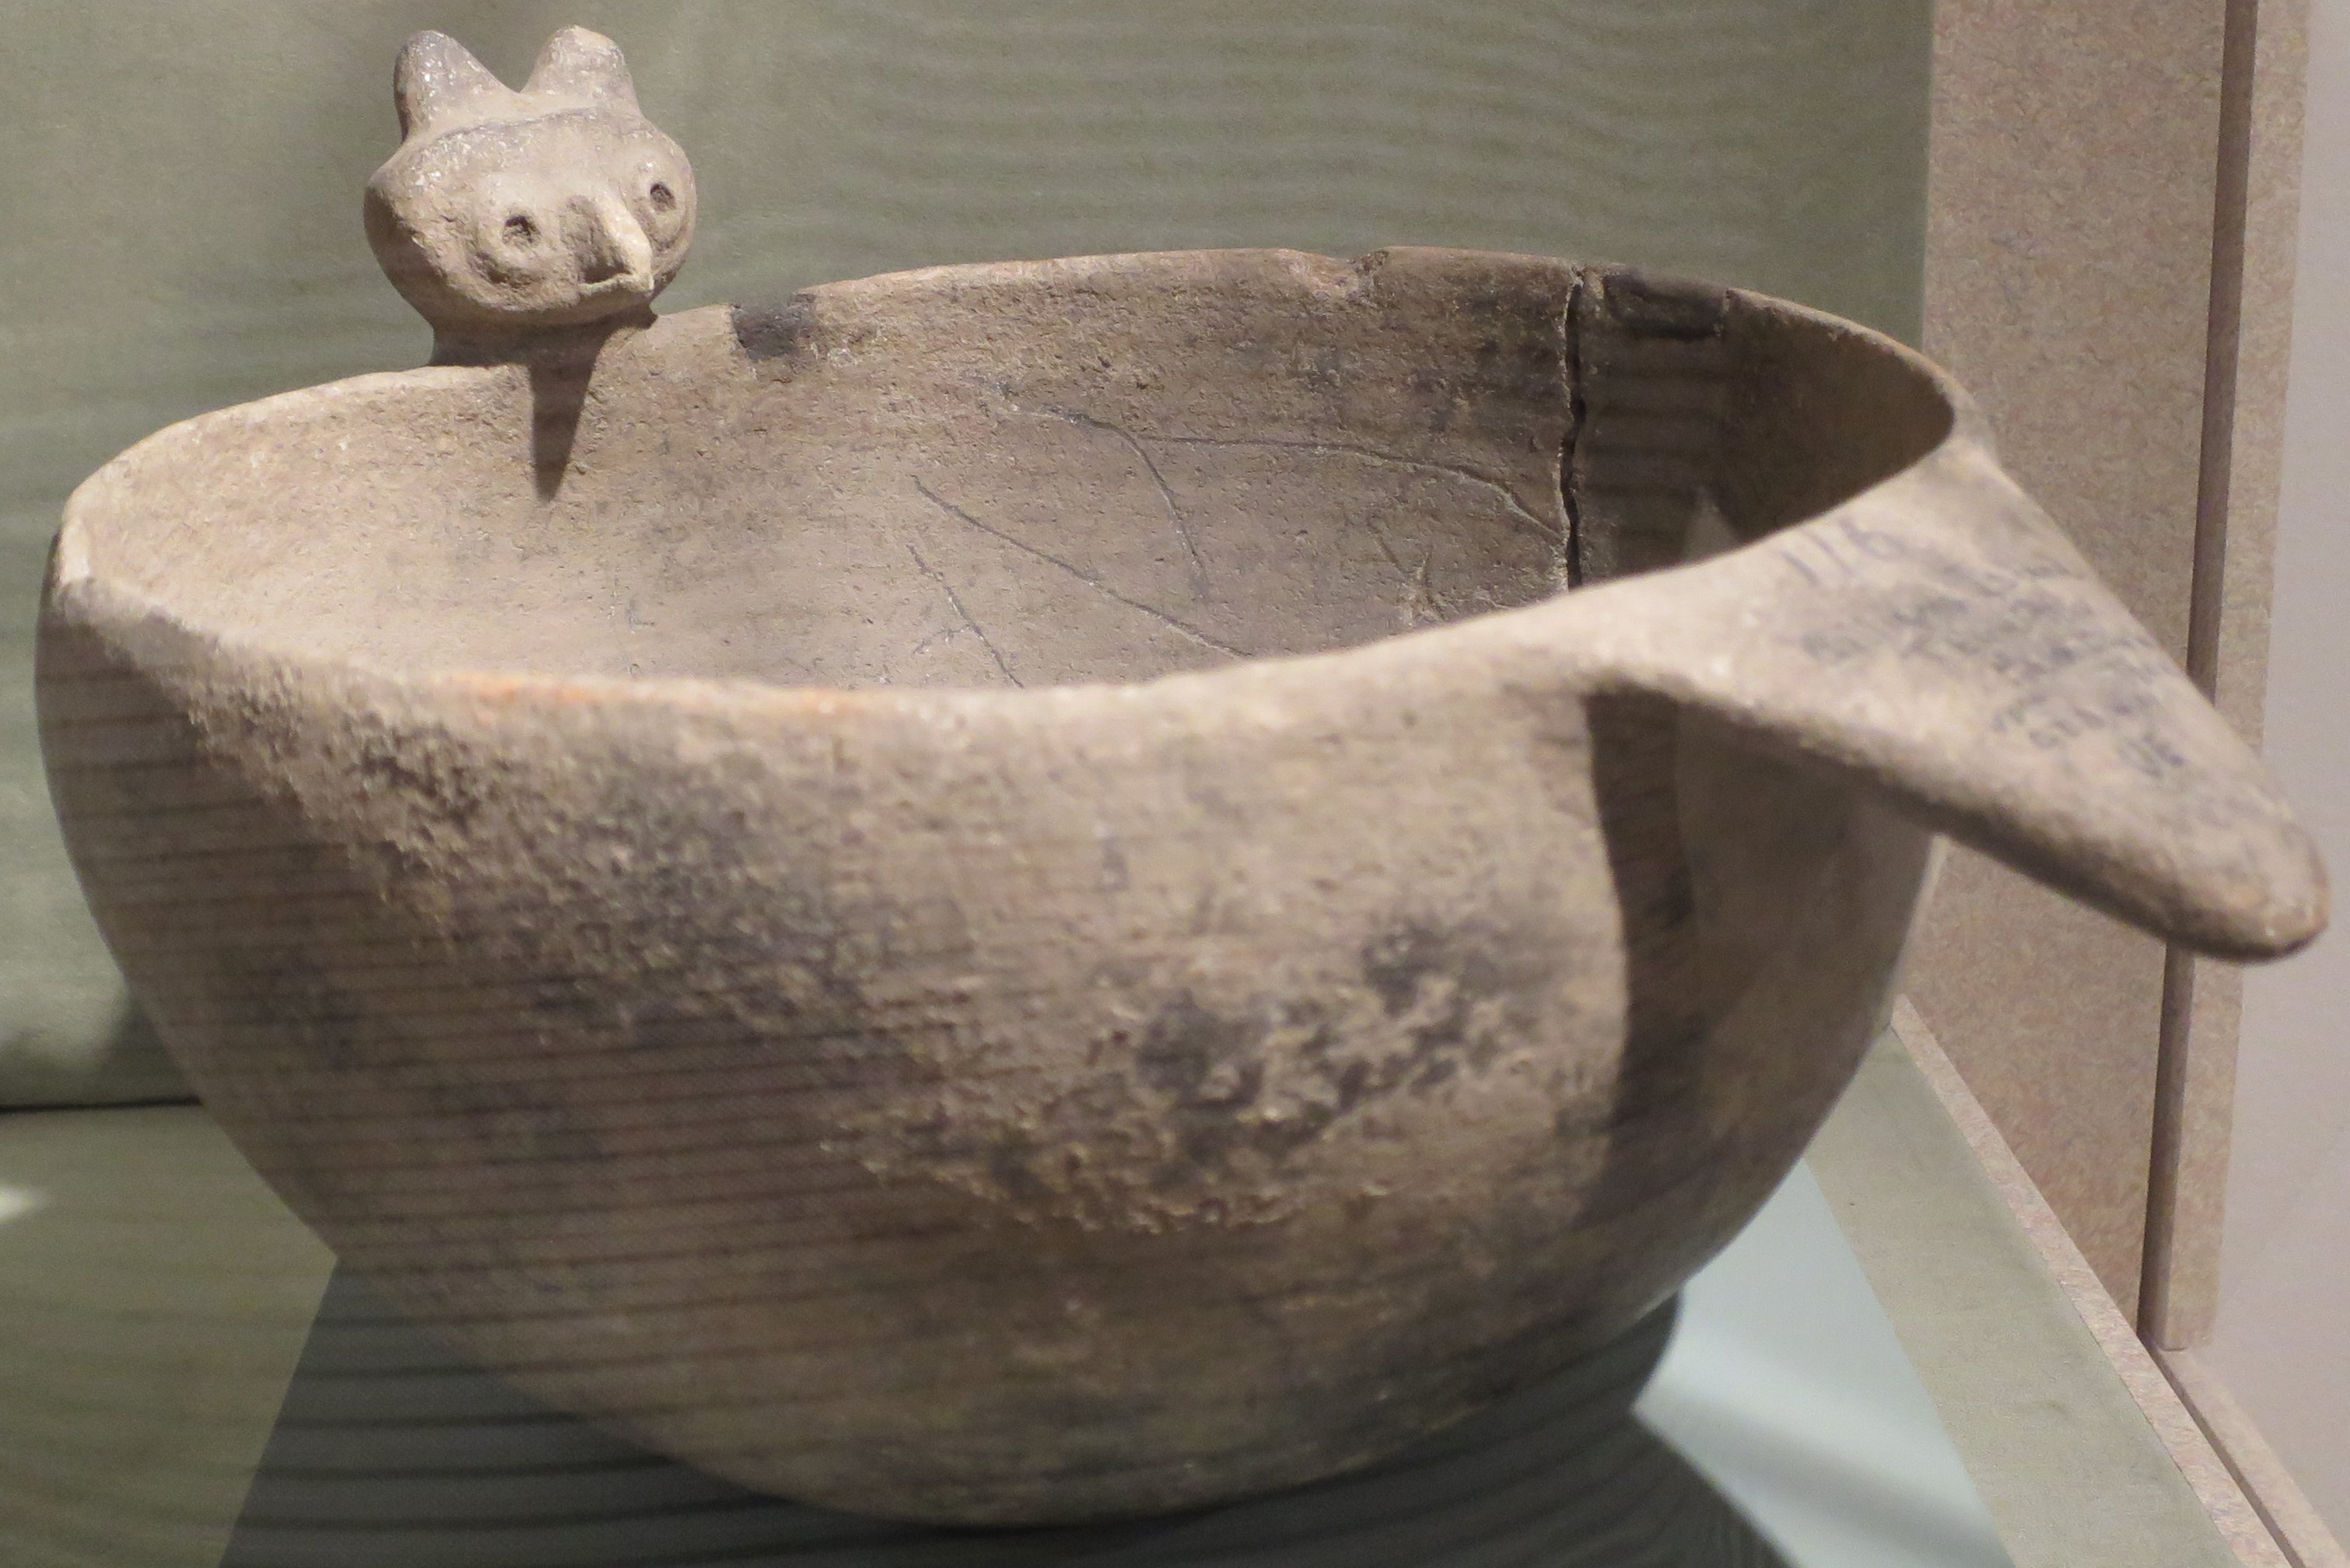 Owl effigy bowl, Mississippian people, c. 1000-1500 CE, fired clay, Dayton Art Institute